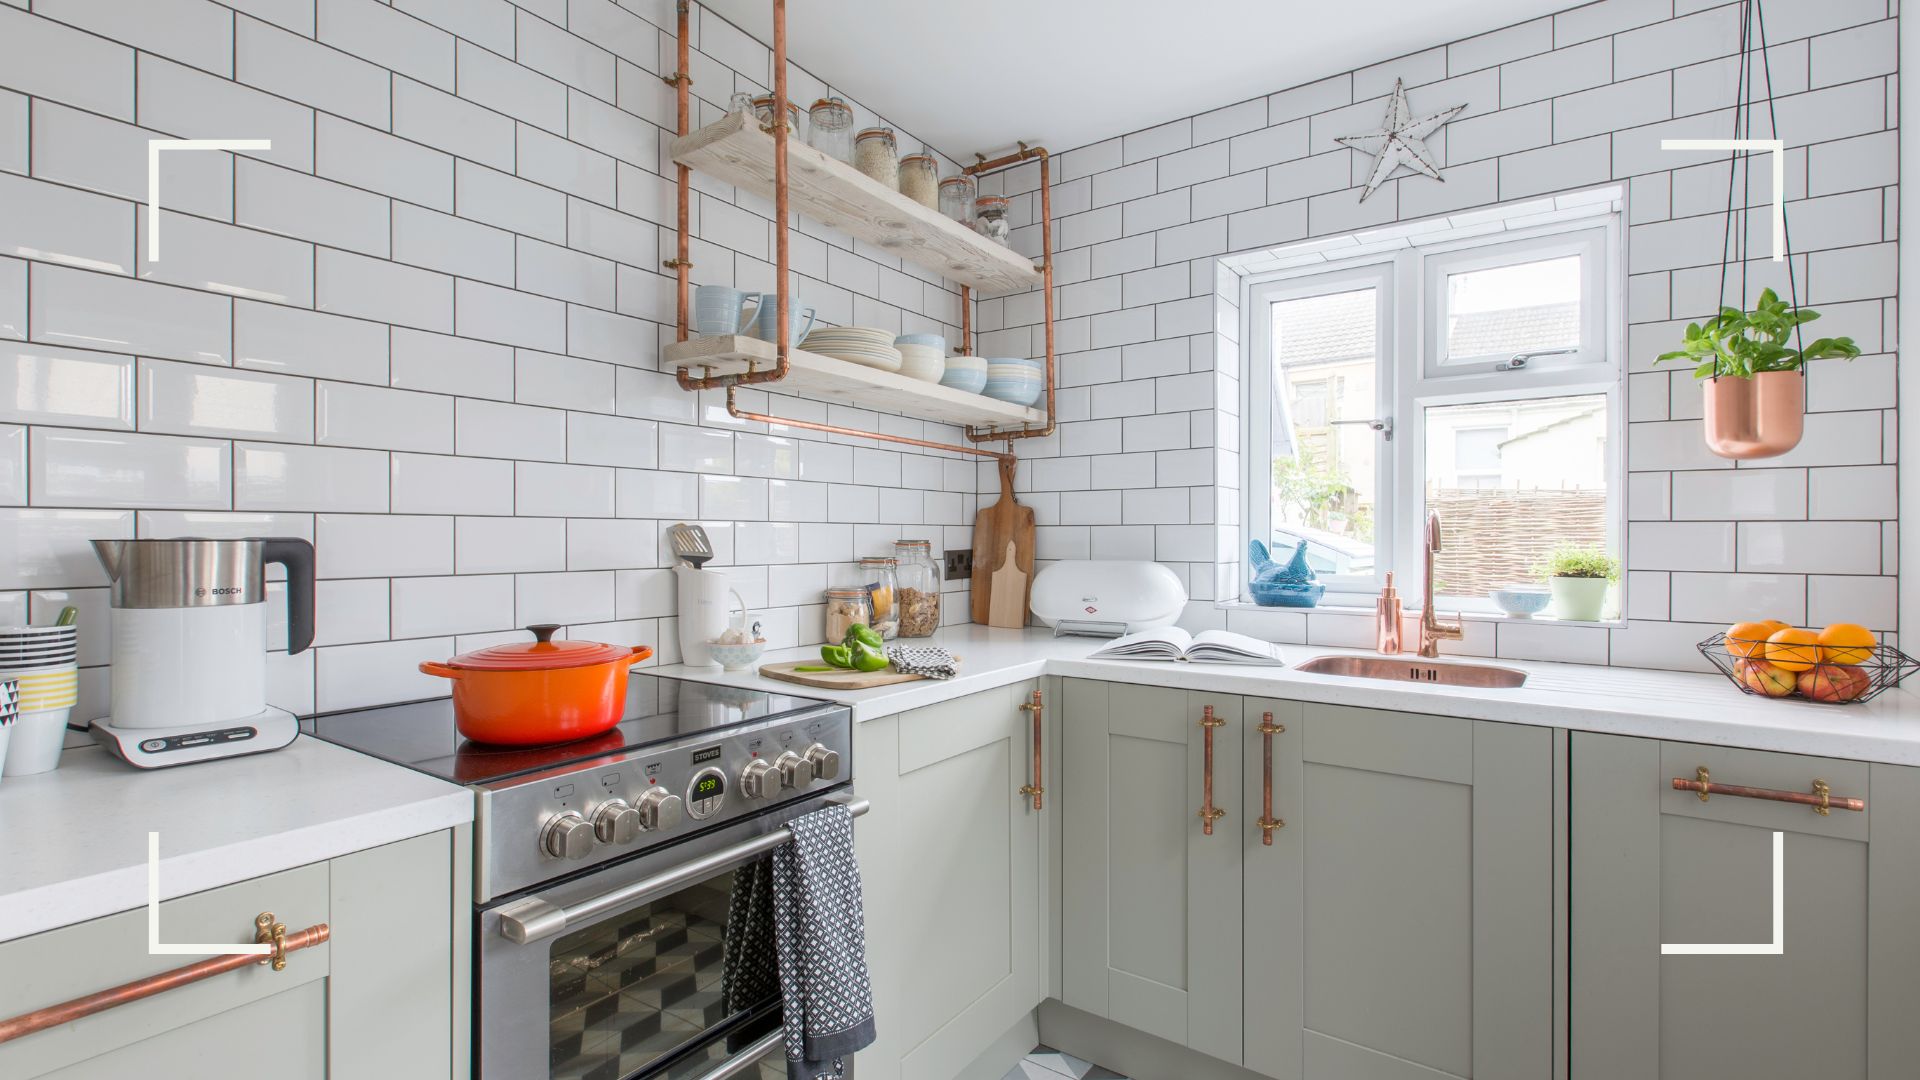 Best kitchen cleaner: our top 5 picks for a gleaming kitchen